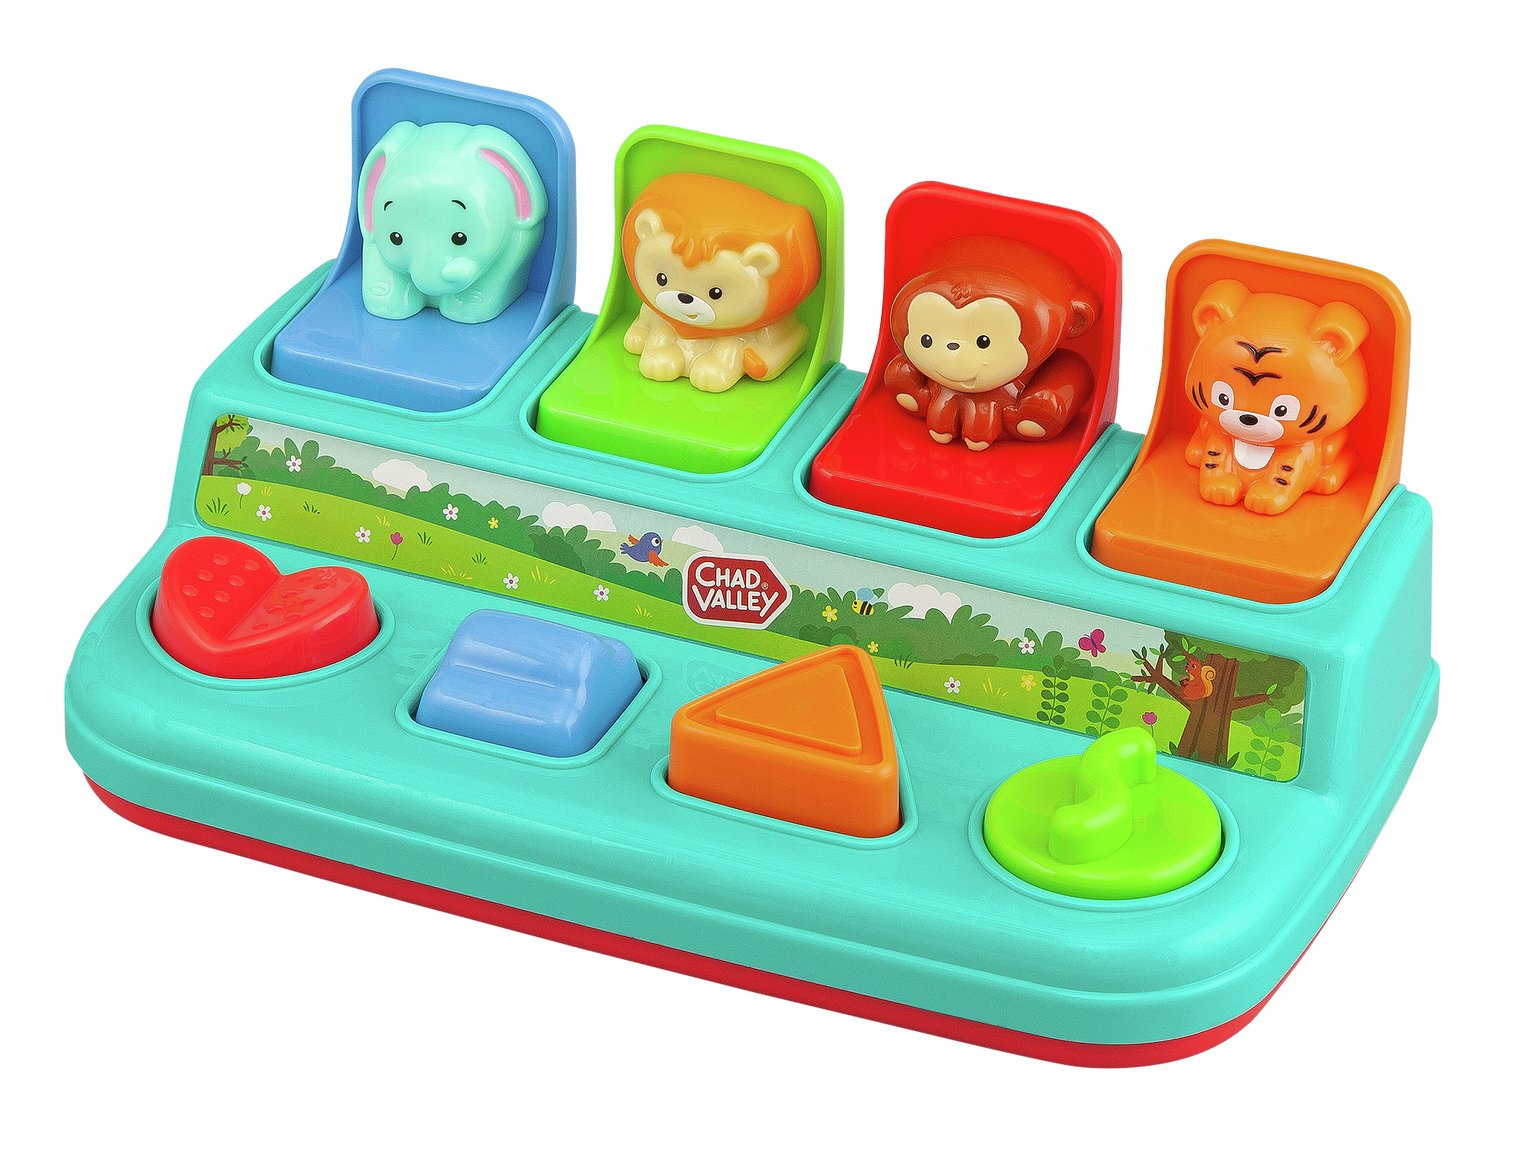 argos educational toys for 1 year old